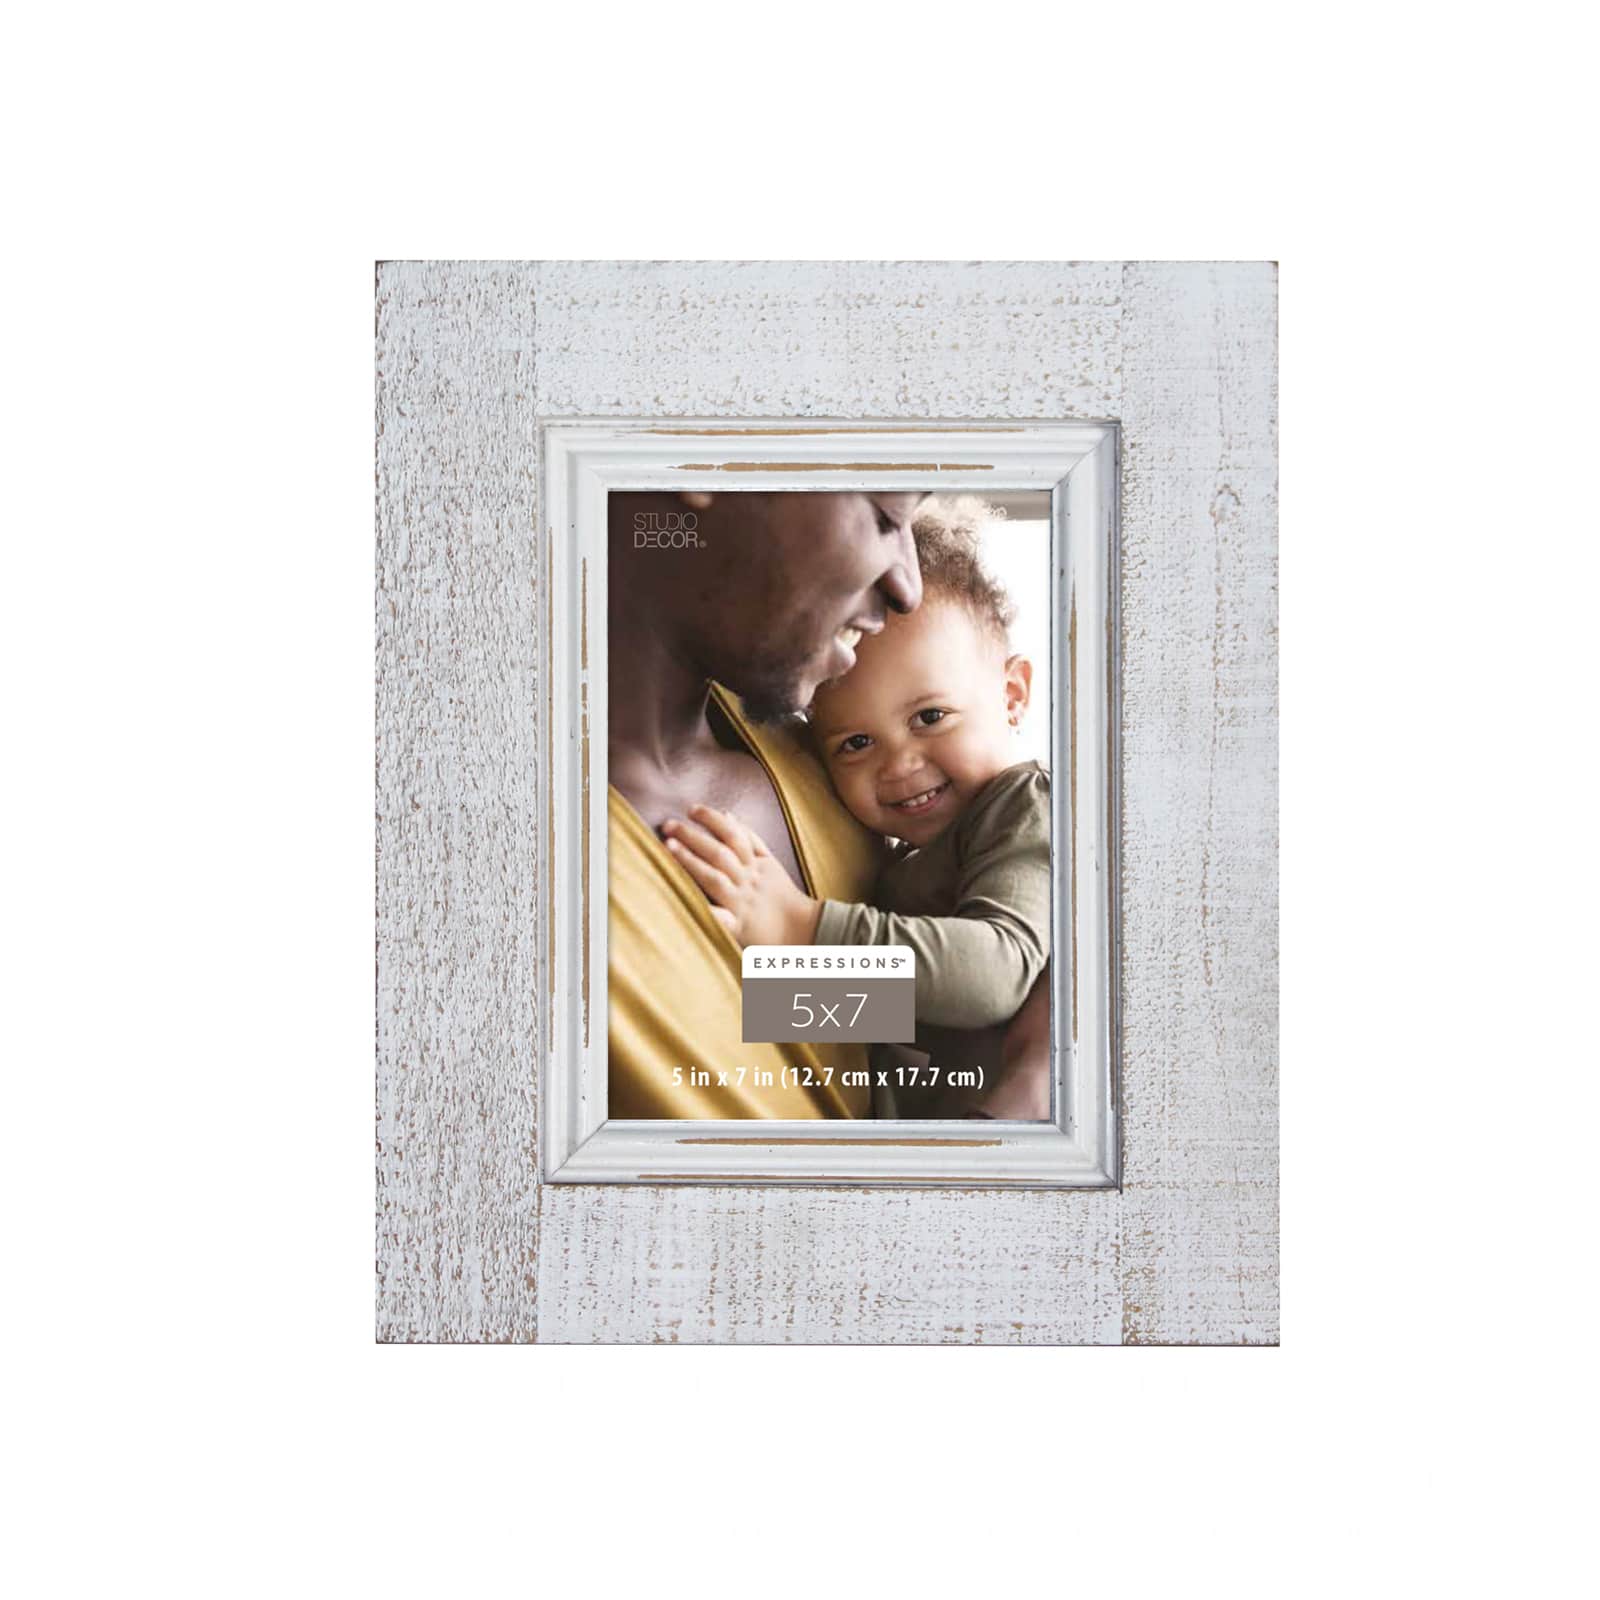 White Frame with Mat, lifestyles by Studio Decor | 5 x 7 | Michaels